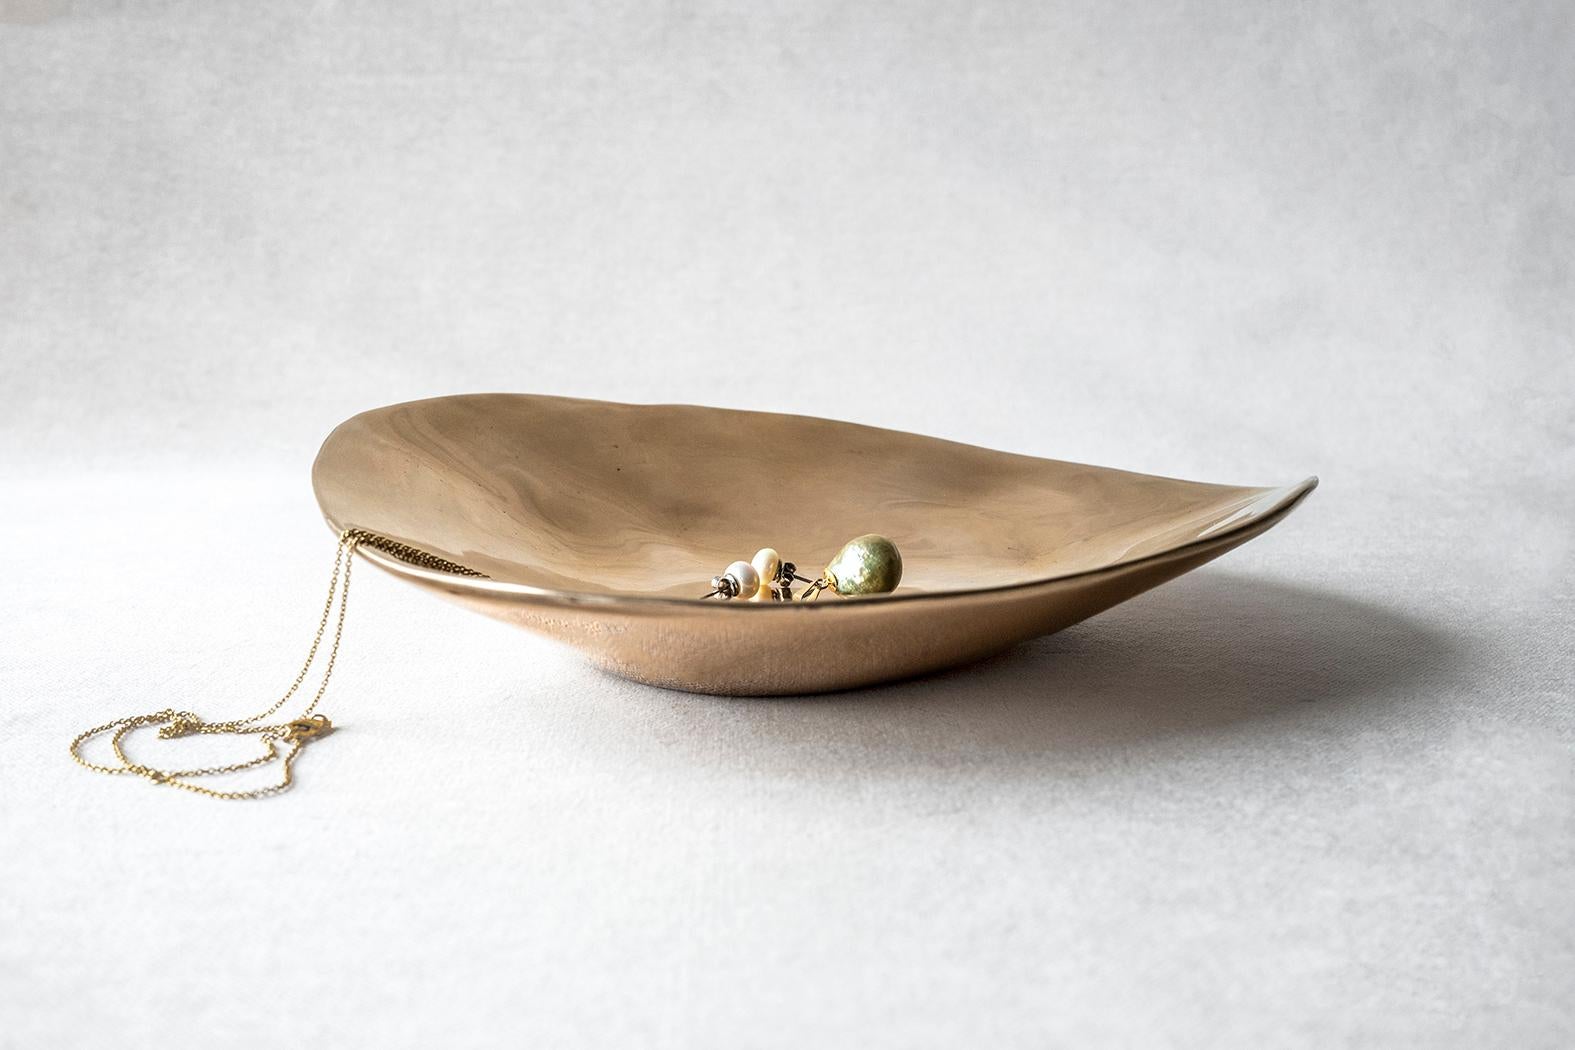 Hollywood Regency Bronze Bijoux Bowls / Conversation Piece / Handcasted Solid Bronze Tray set of 2 For Sale